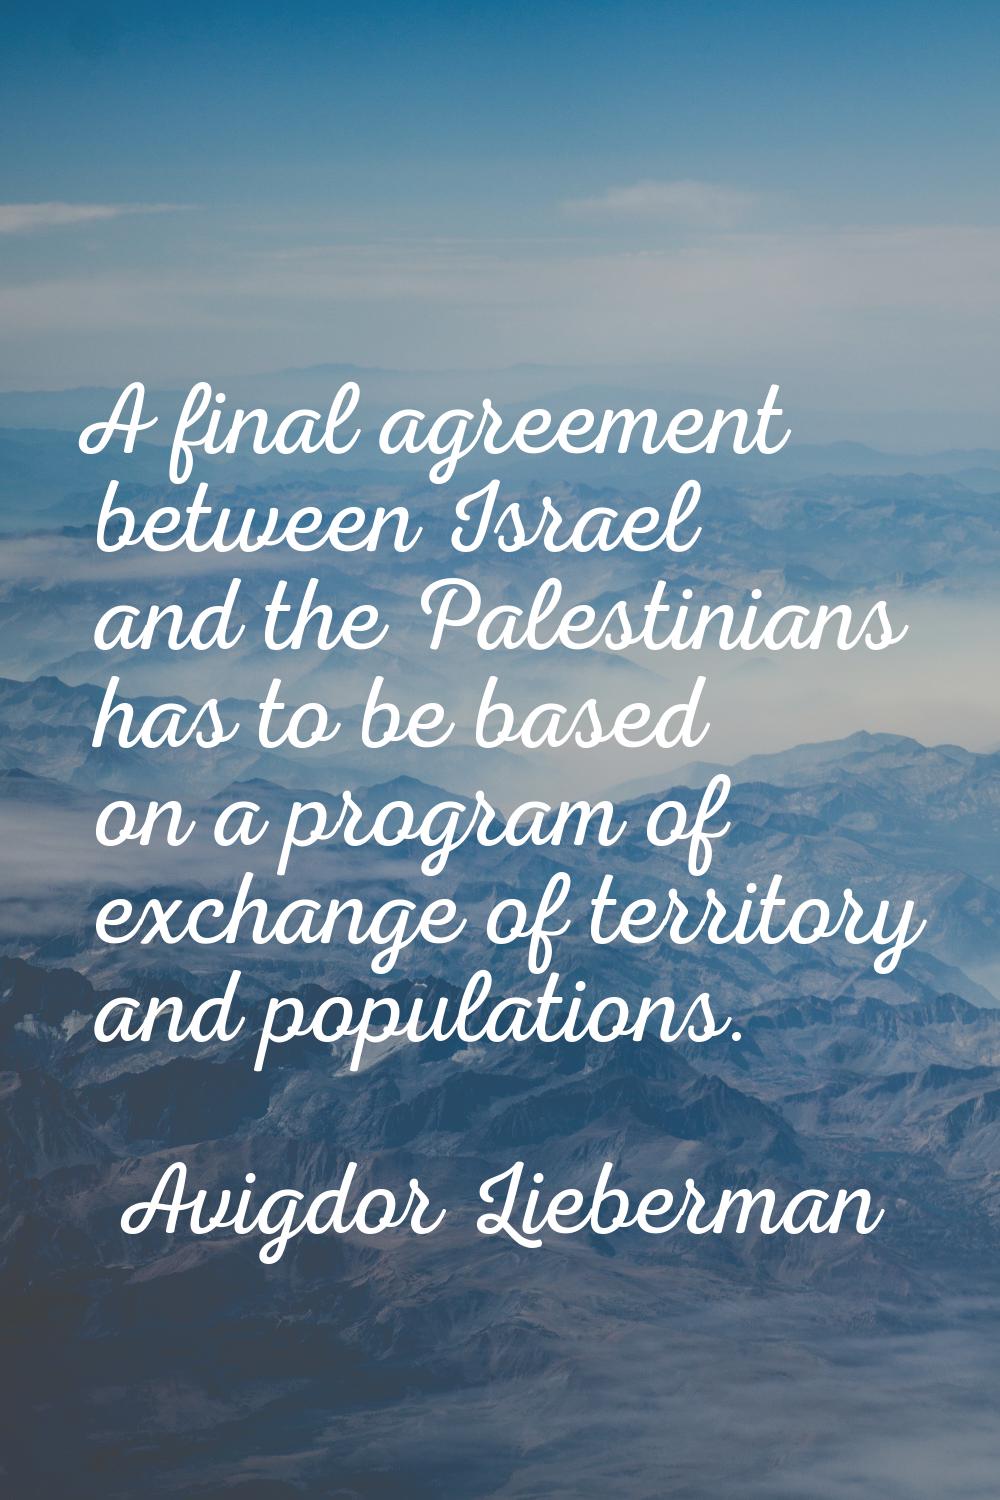 A final agreement between Israel and the Palestinians has to be based on a program of exchange of t